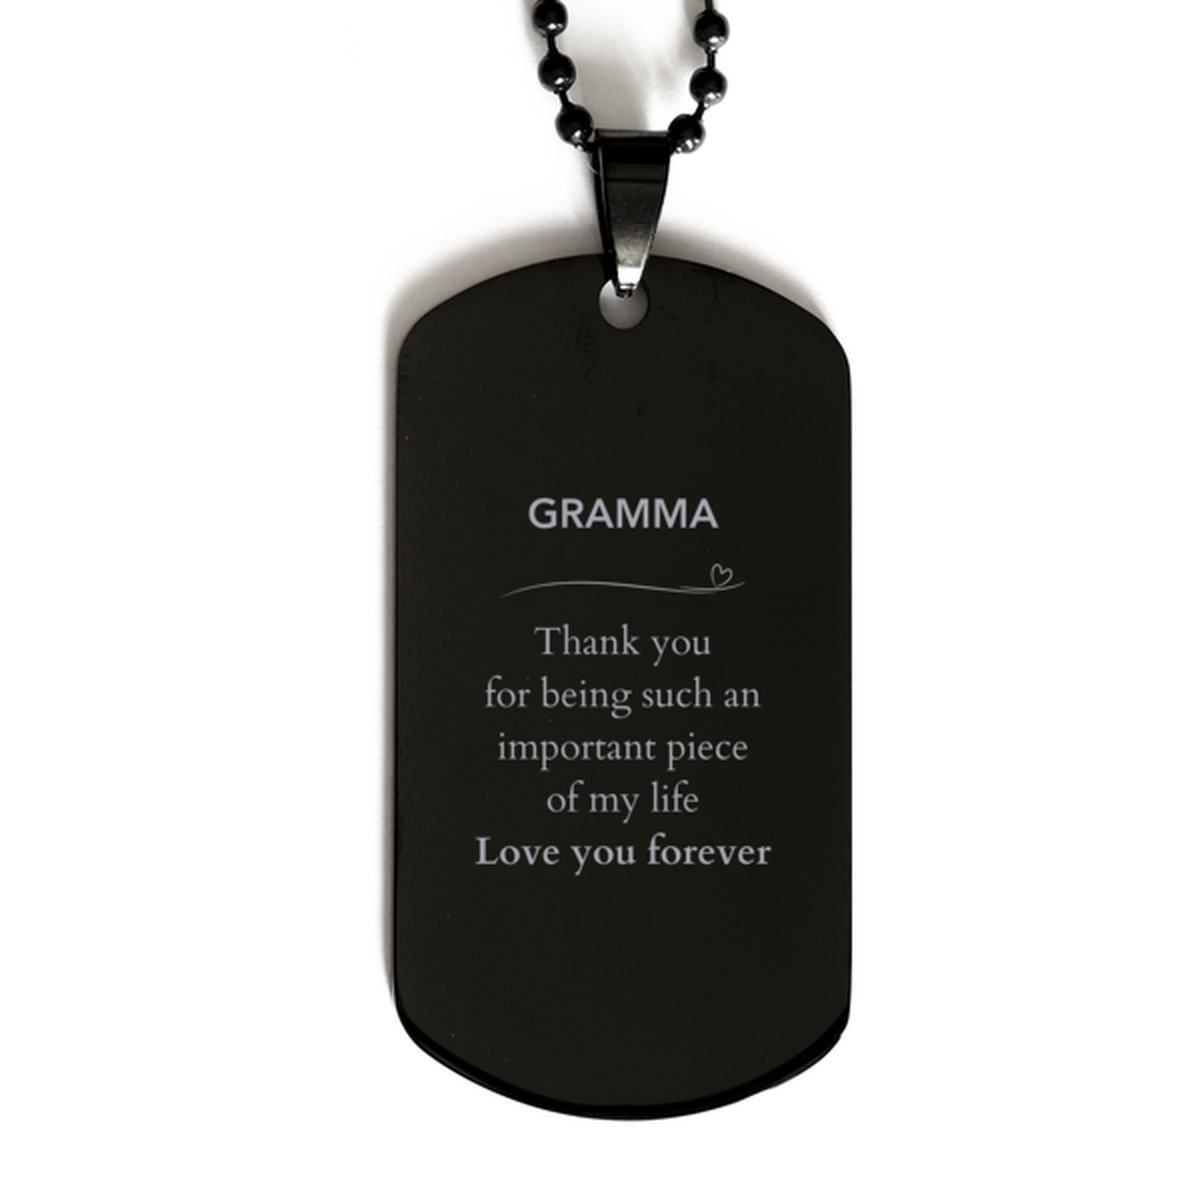 Appropriate Gramma Black Dog Tag Epic Birthday Gifts for Gramma Thank you for being such an important piece of my life Gramma Christmas Mothers Fathers Day